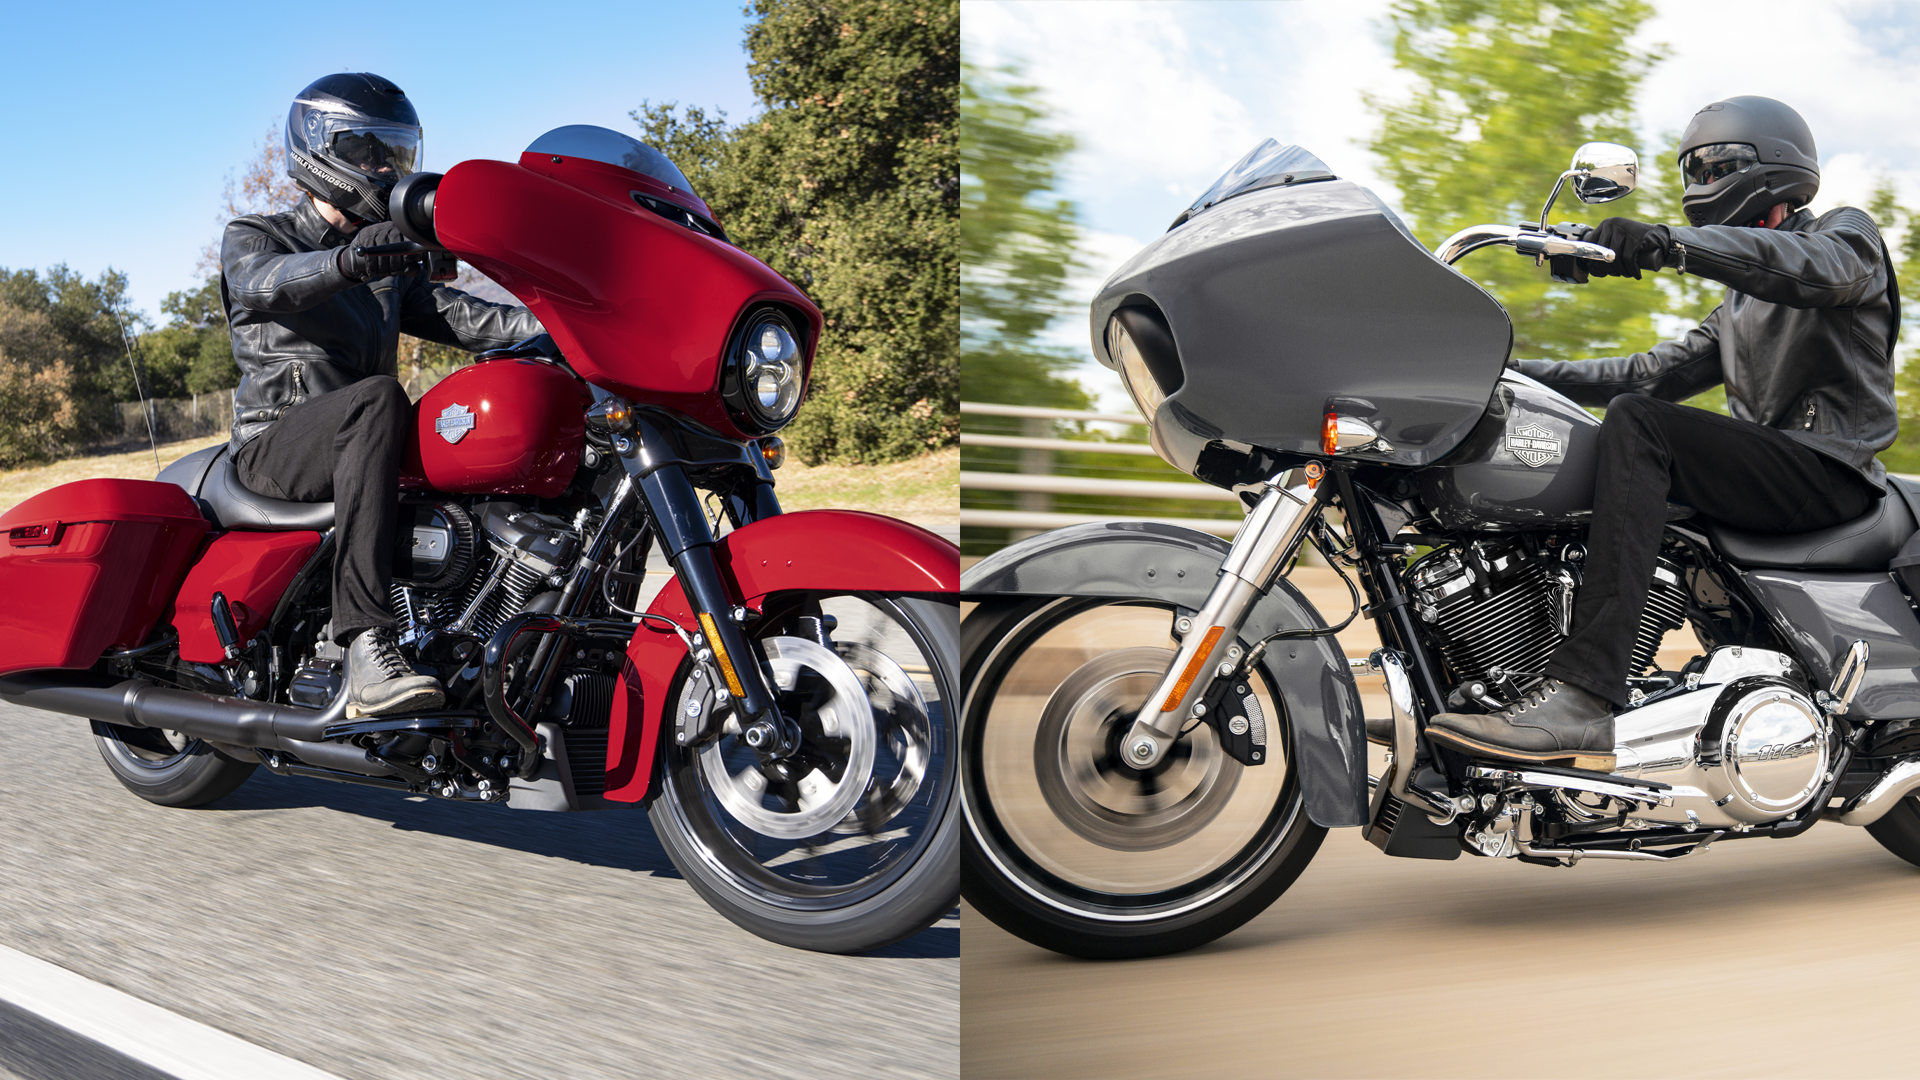 2022 Harley-Davidson Street Glide Special and Road Glide Special